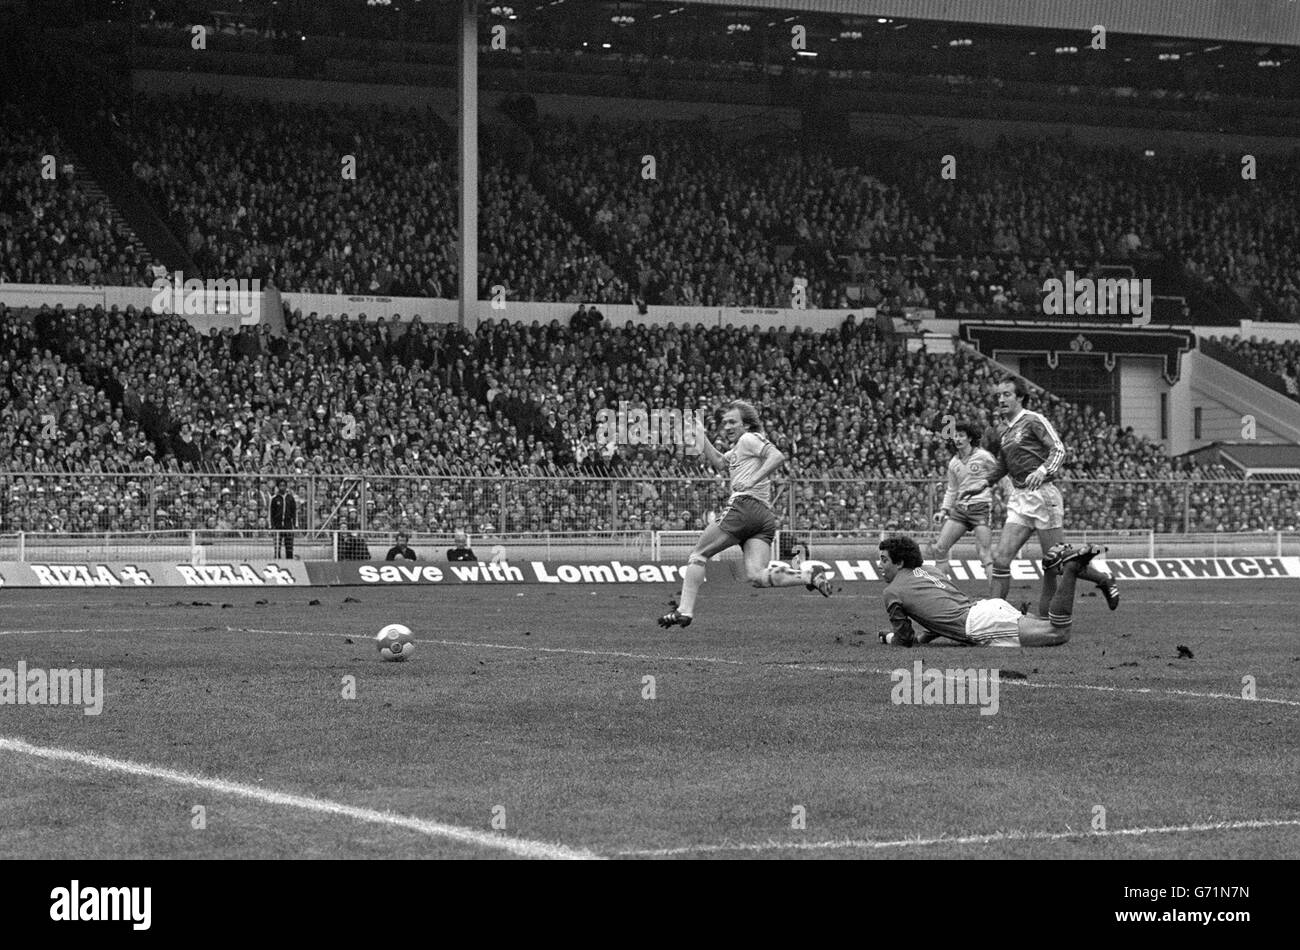 David Peach (left) turns Nottingham Forest goalkeeper Peter Shilton (on ground) to give Southampton the lead in the 16th minute of the Football League Cup final at Wembley. Stock Photo